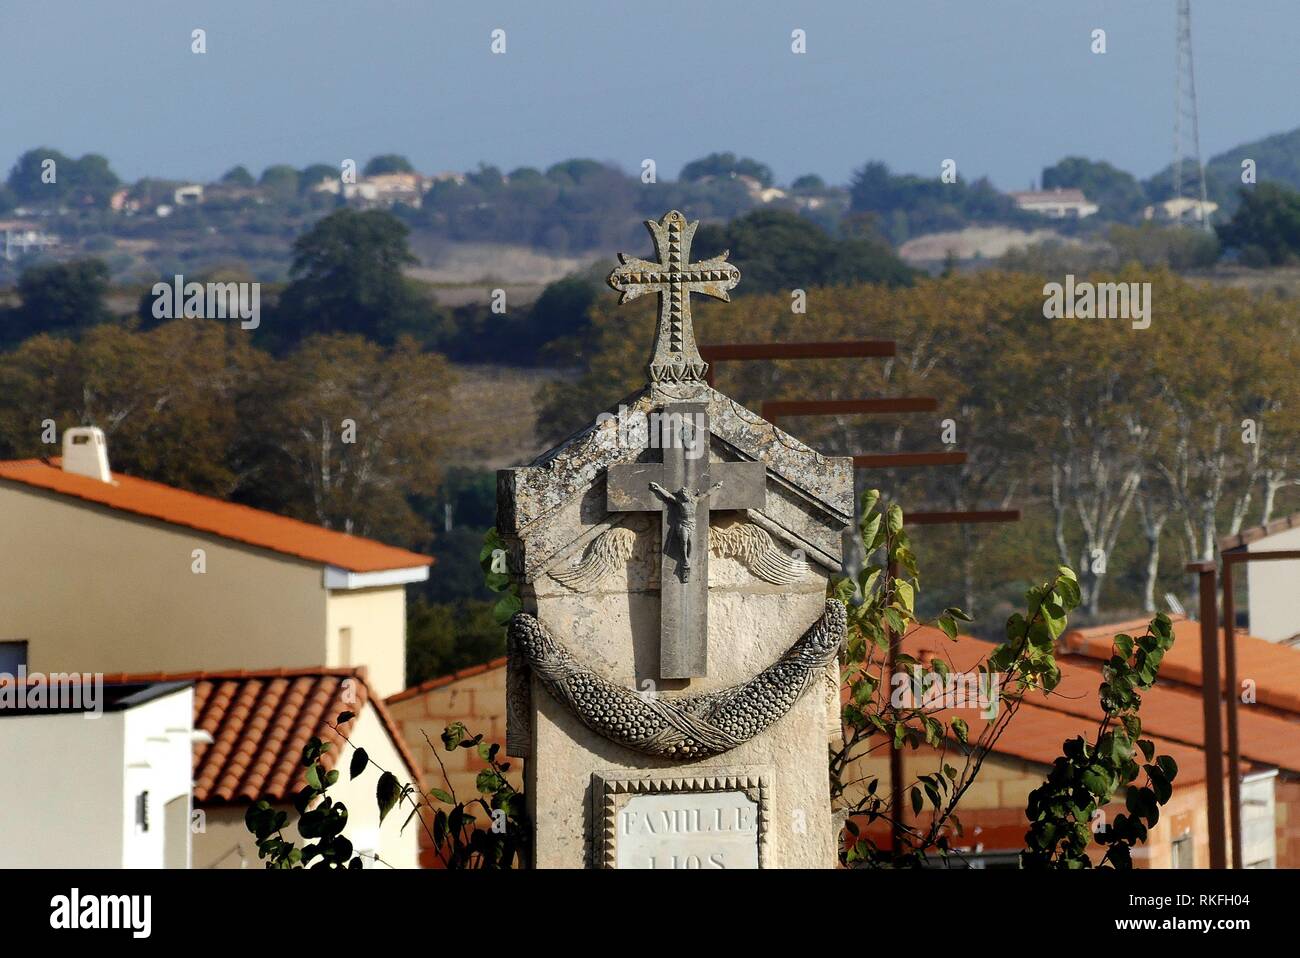 The view from a cemetery of a cross and the Peyne river valley, Pézenas , Herault, France. Stock Photo